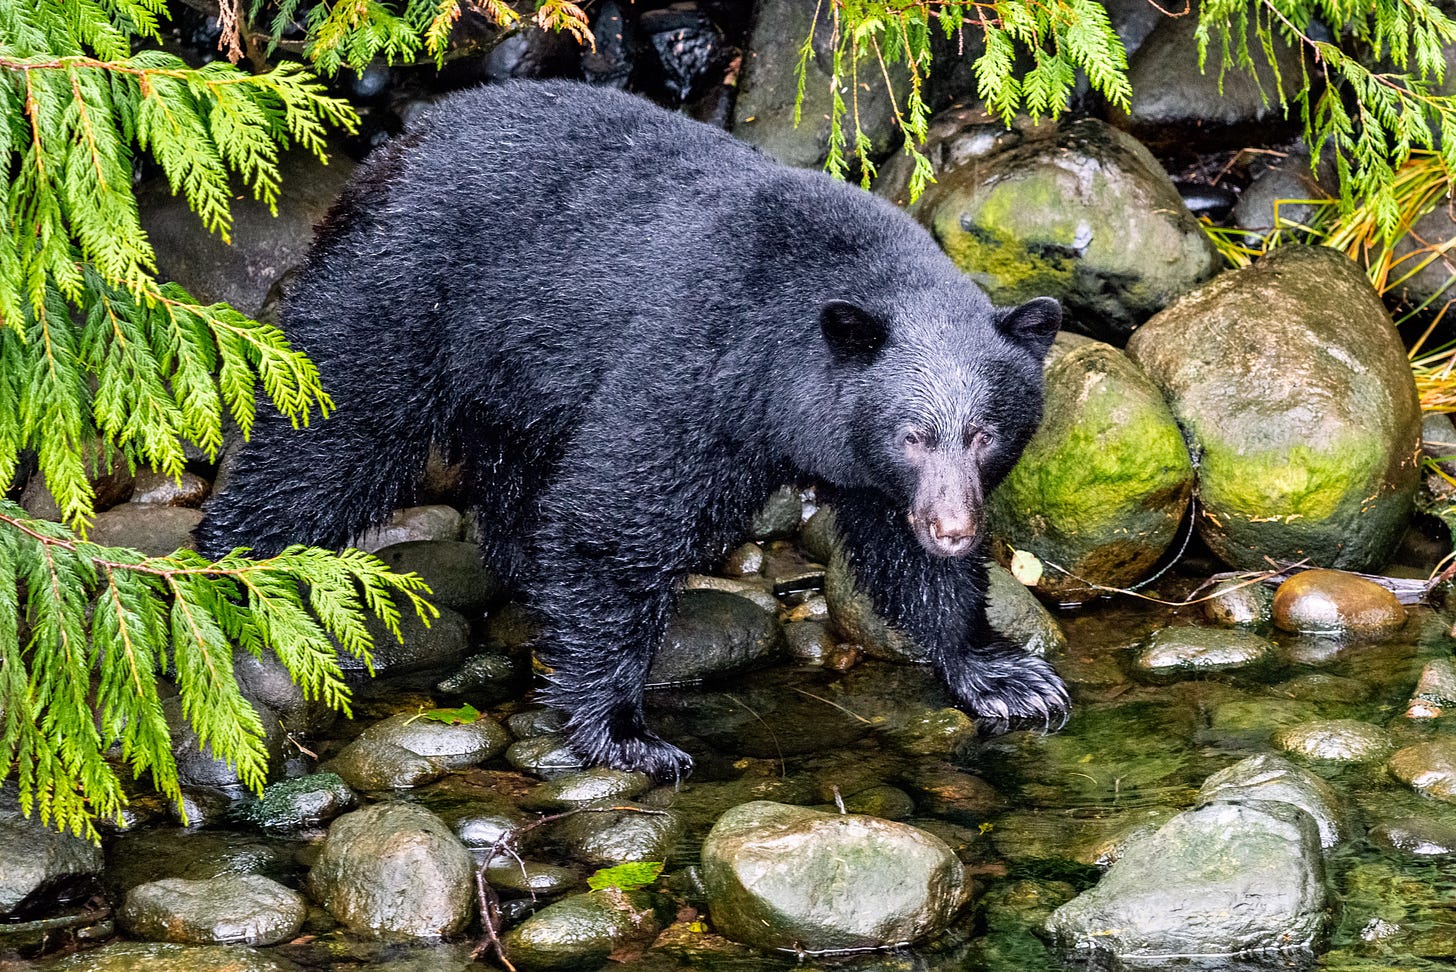 A black bear crosses a river in the forest.